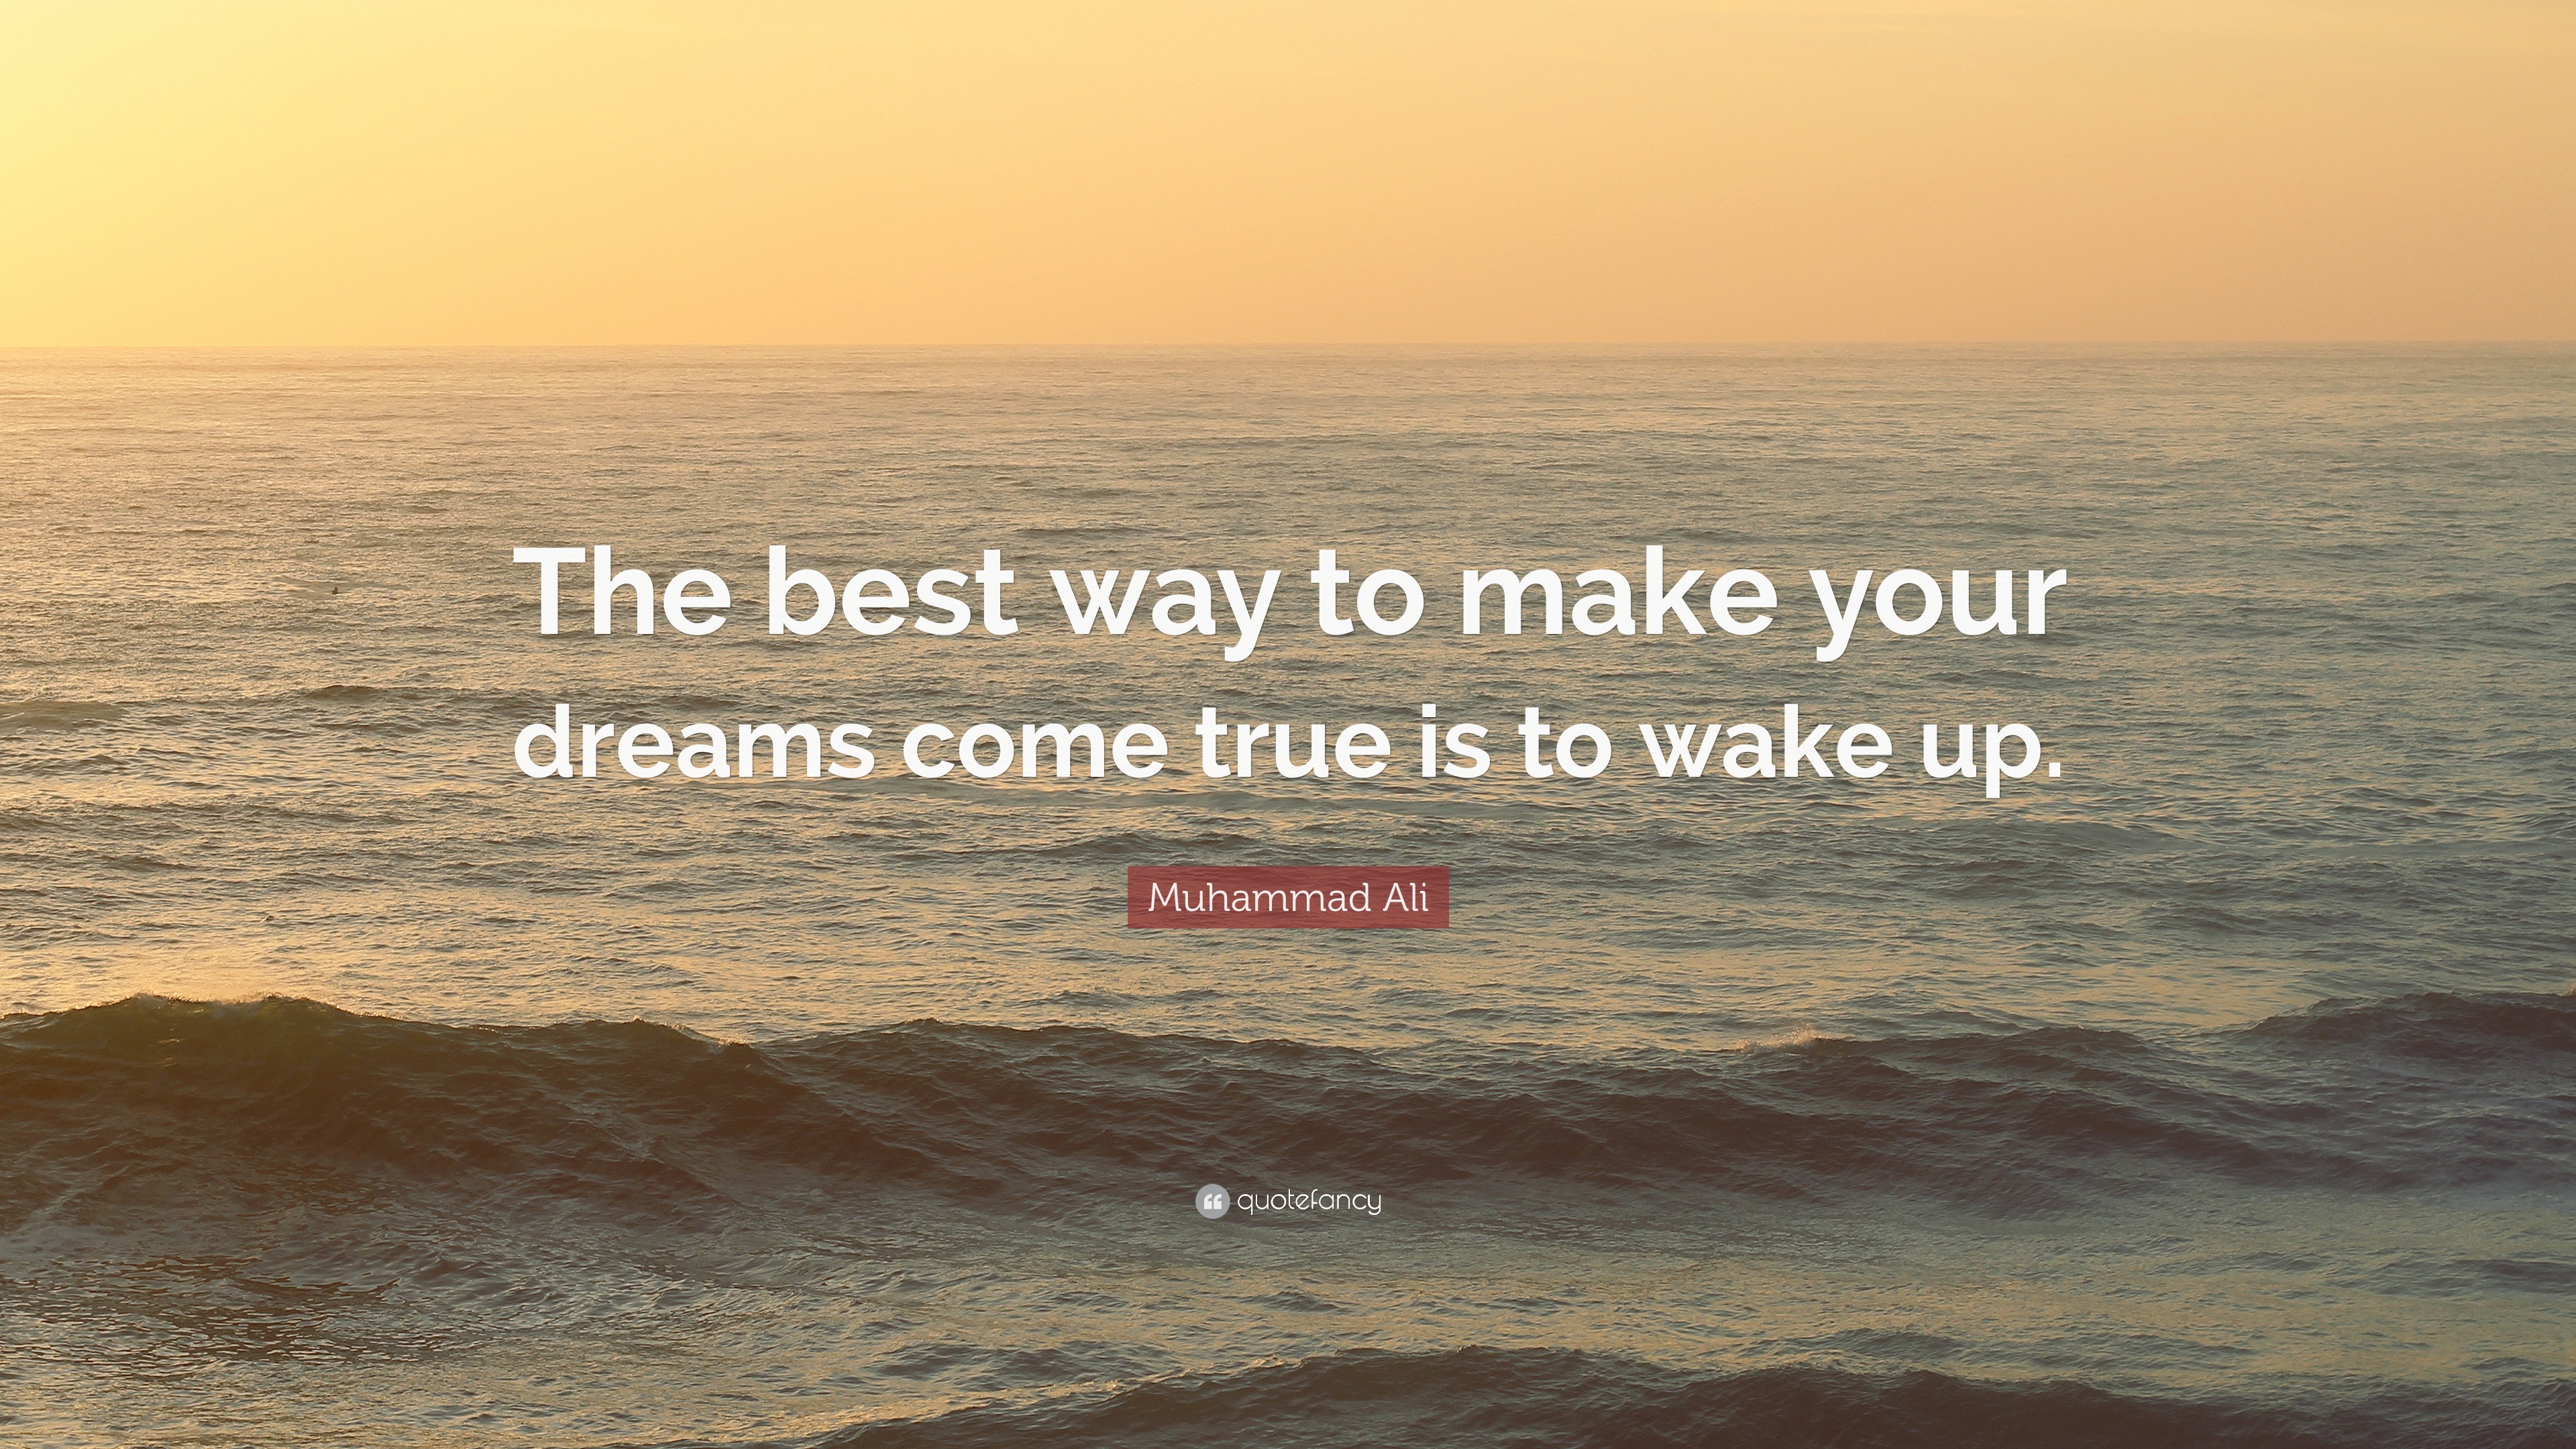 Muhammad Ali Quote: “The best way to make your dreams come true is to